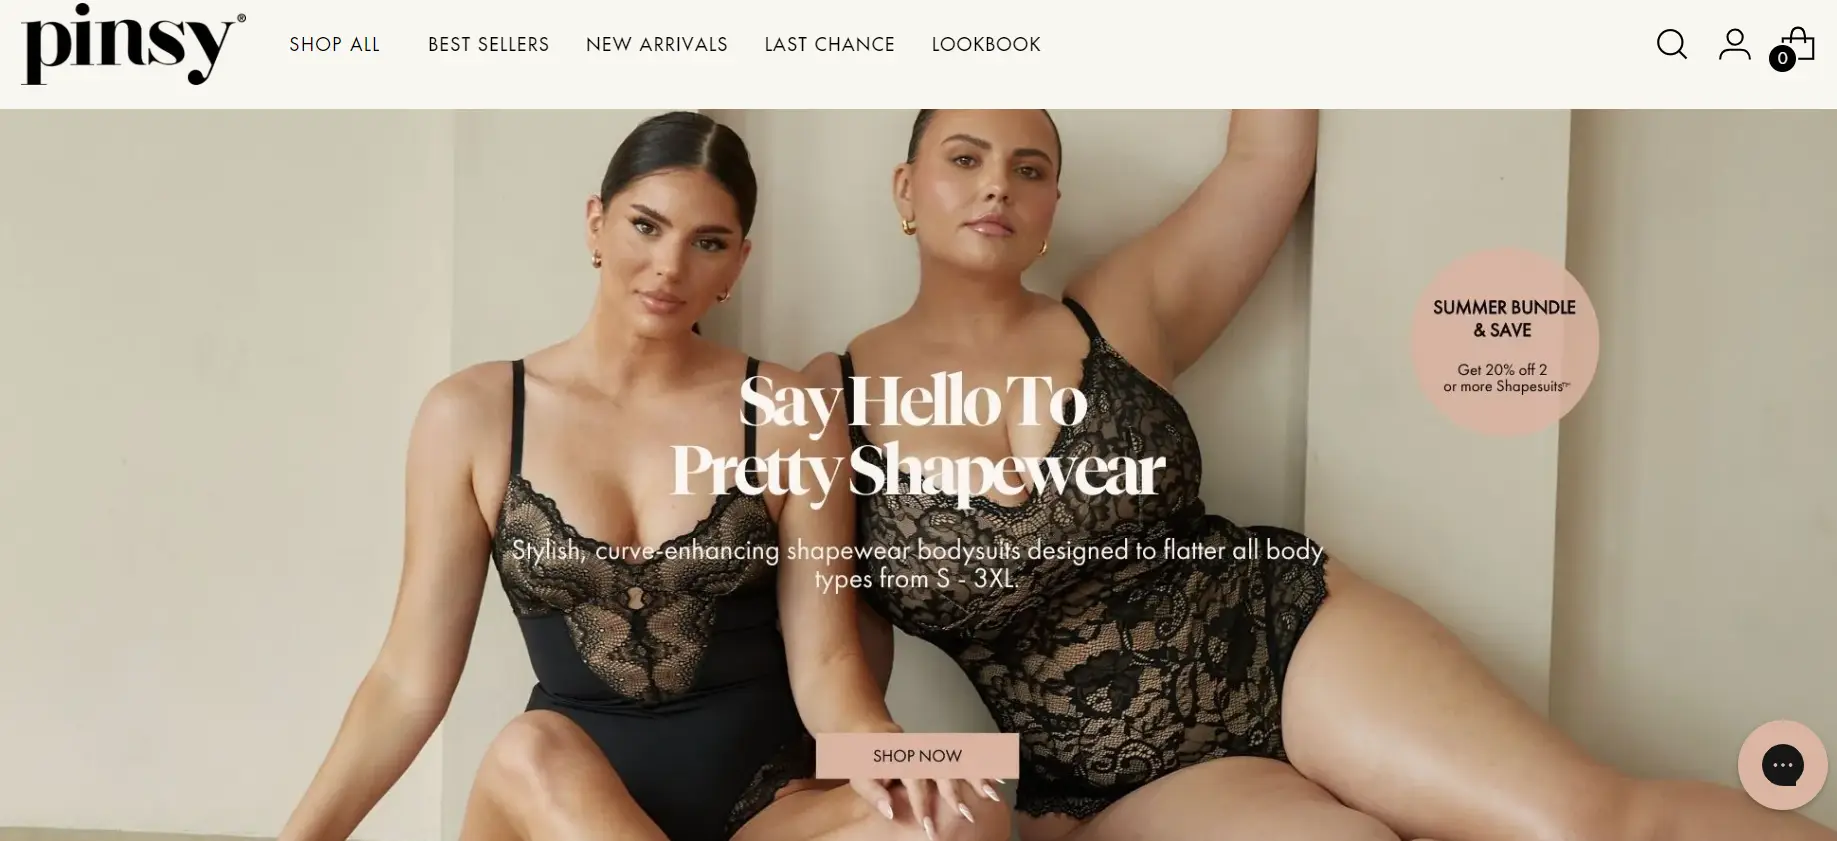 You are currently viewing Pinsy Shapewear Reviews – Is It Legit & Worth Trying?